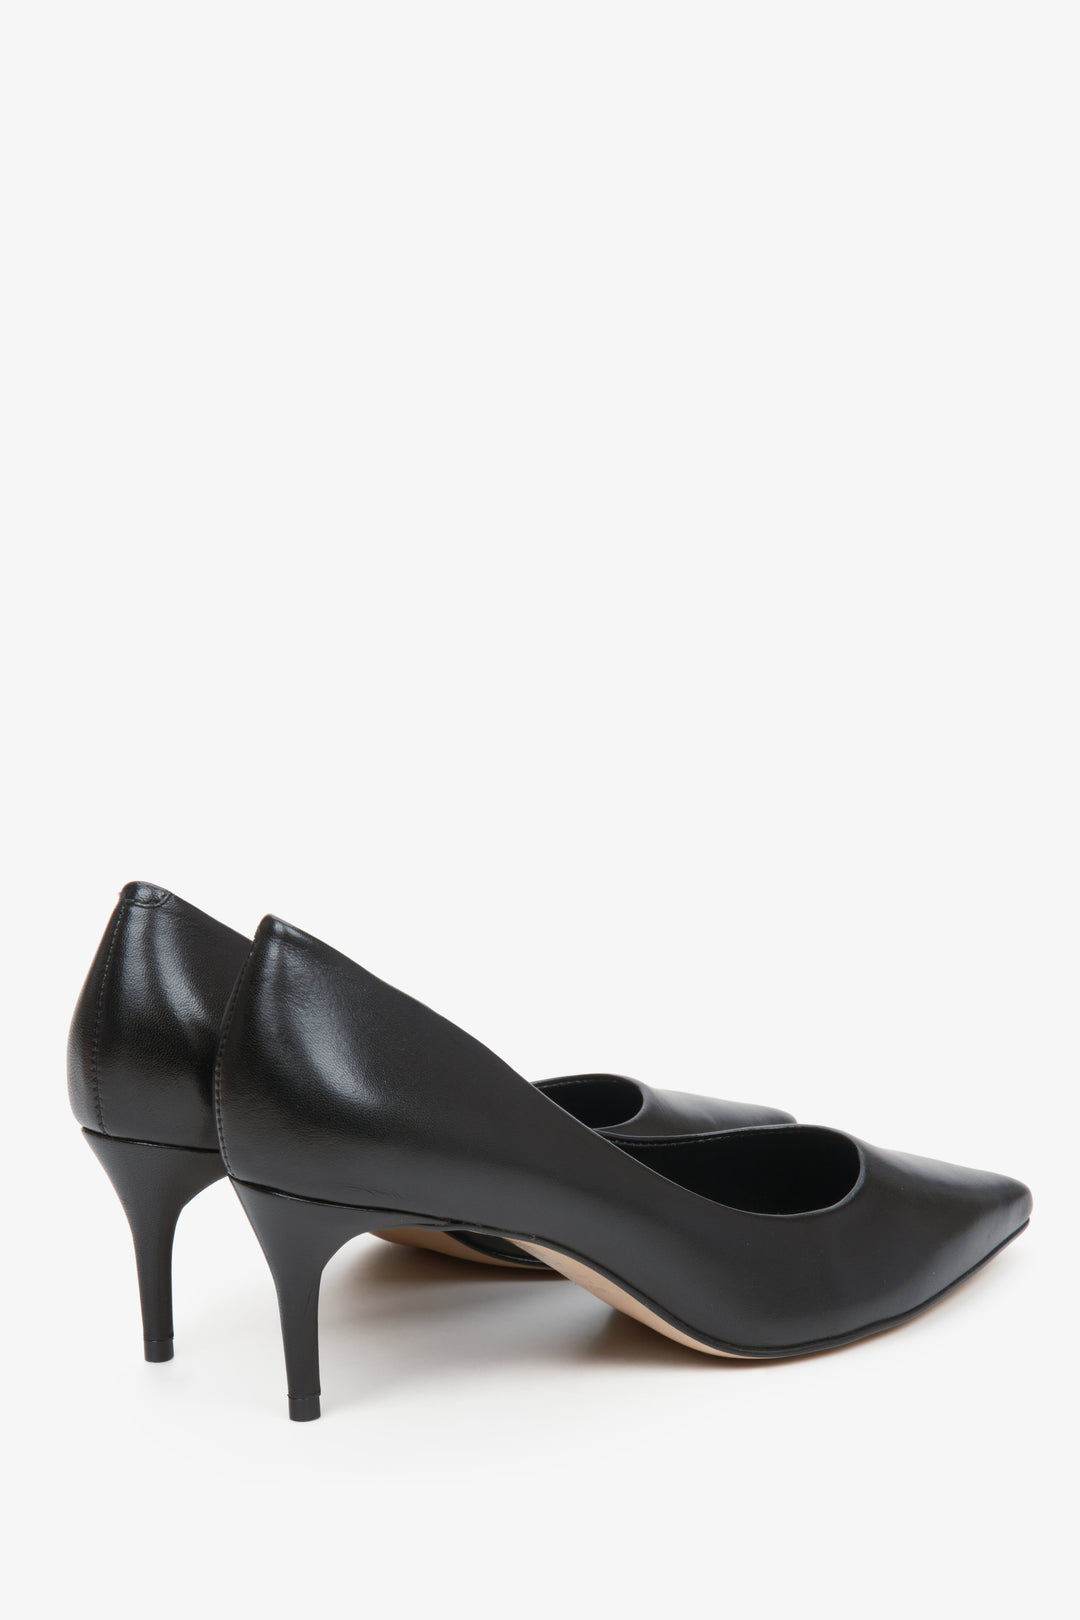 Women's leather shoes with a low heel in black colour - close-up of the heel line.